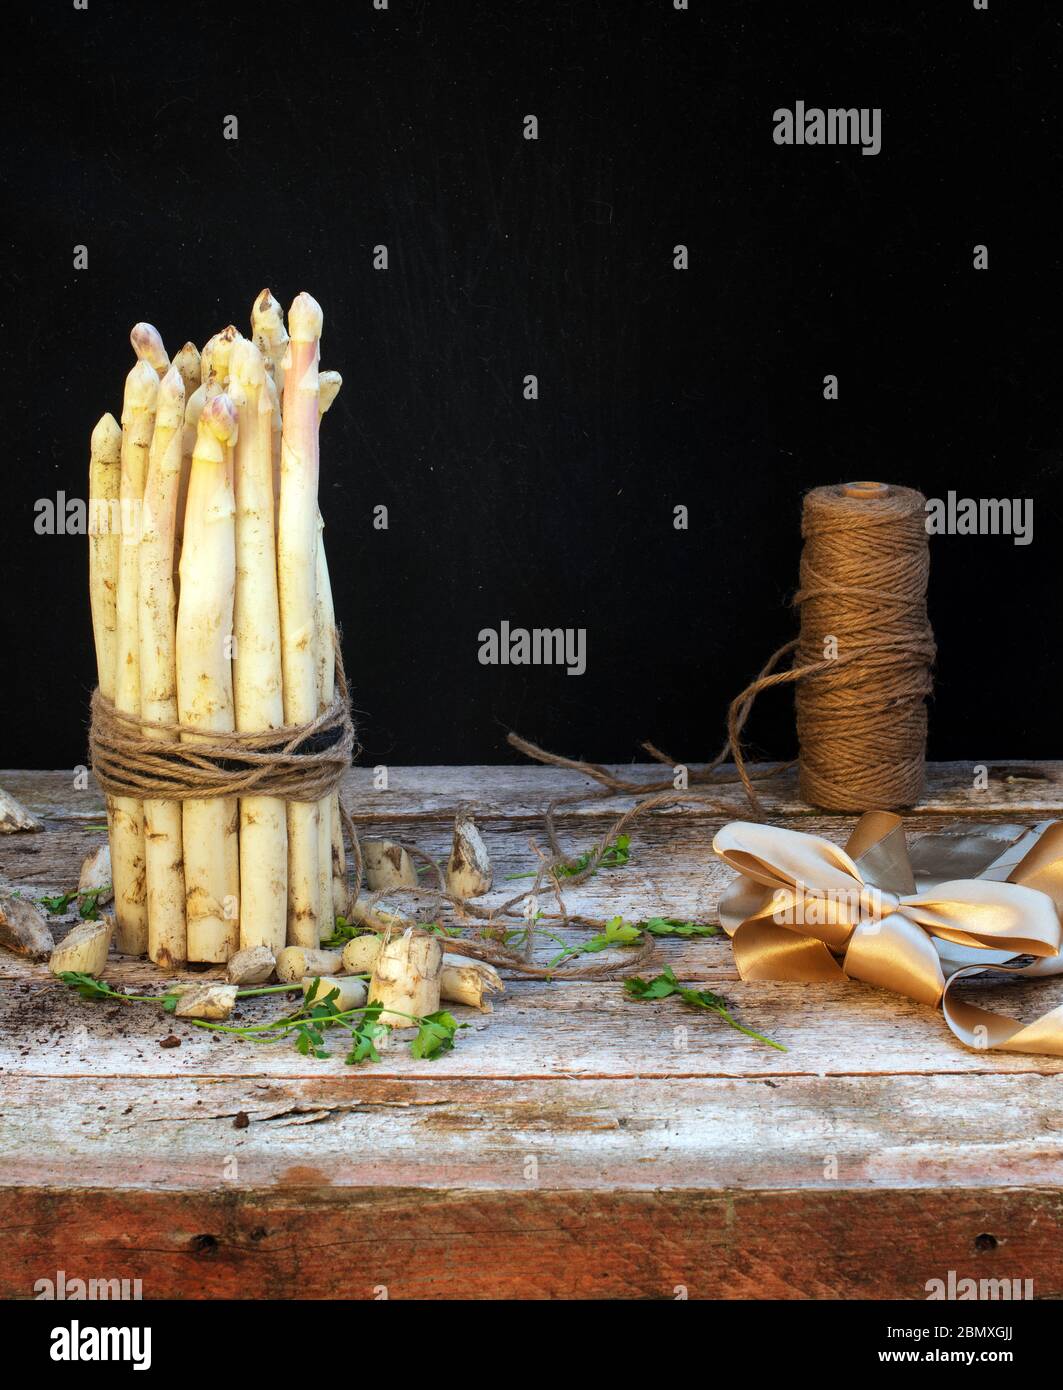 white asparagus side view on wooden table with black background Stock Photo